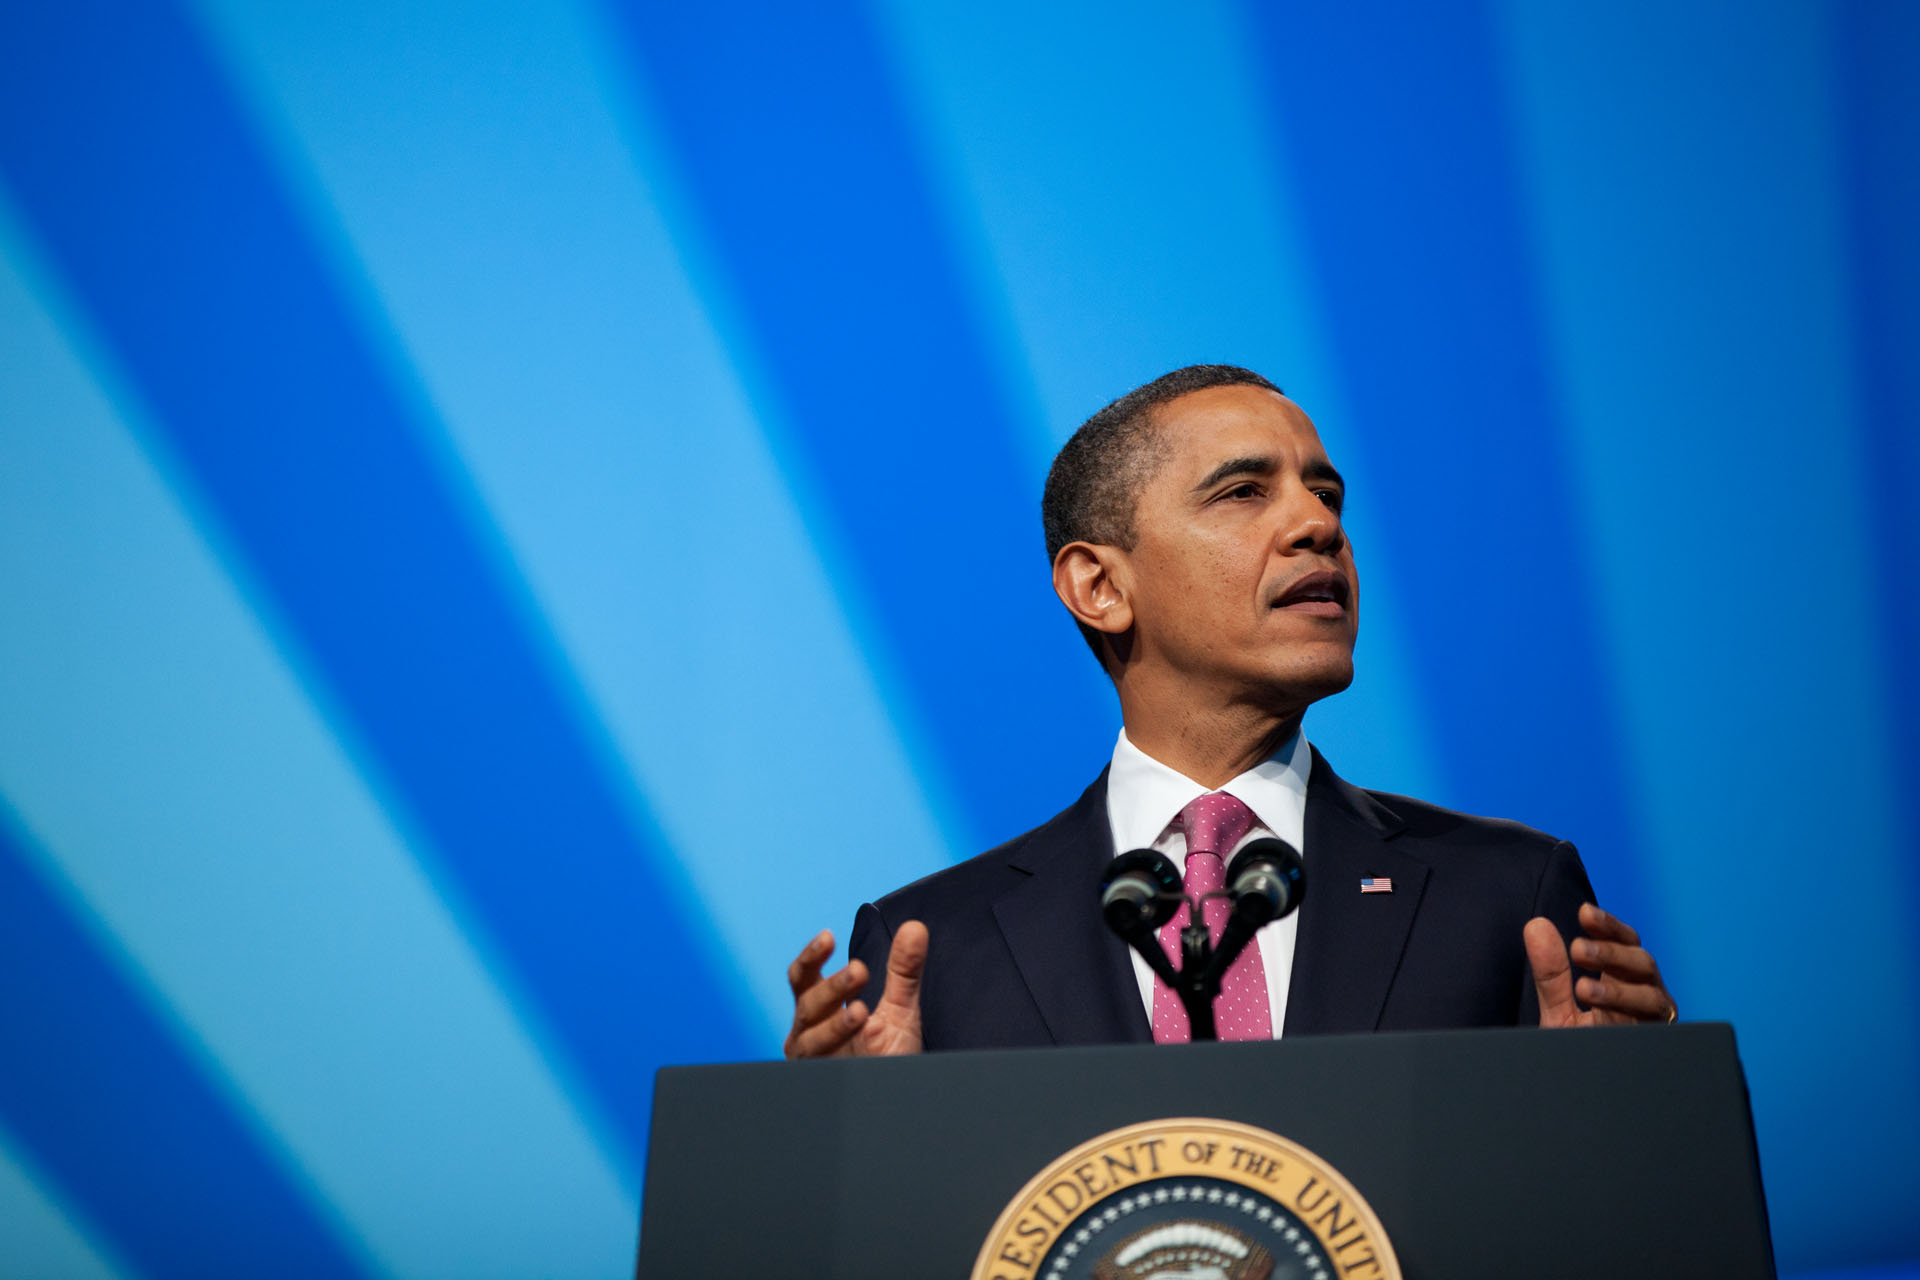 President Barack Obama delivers remarks to the American Israel Public Affairs Committee (AIPAC) Policy Conference 